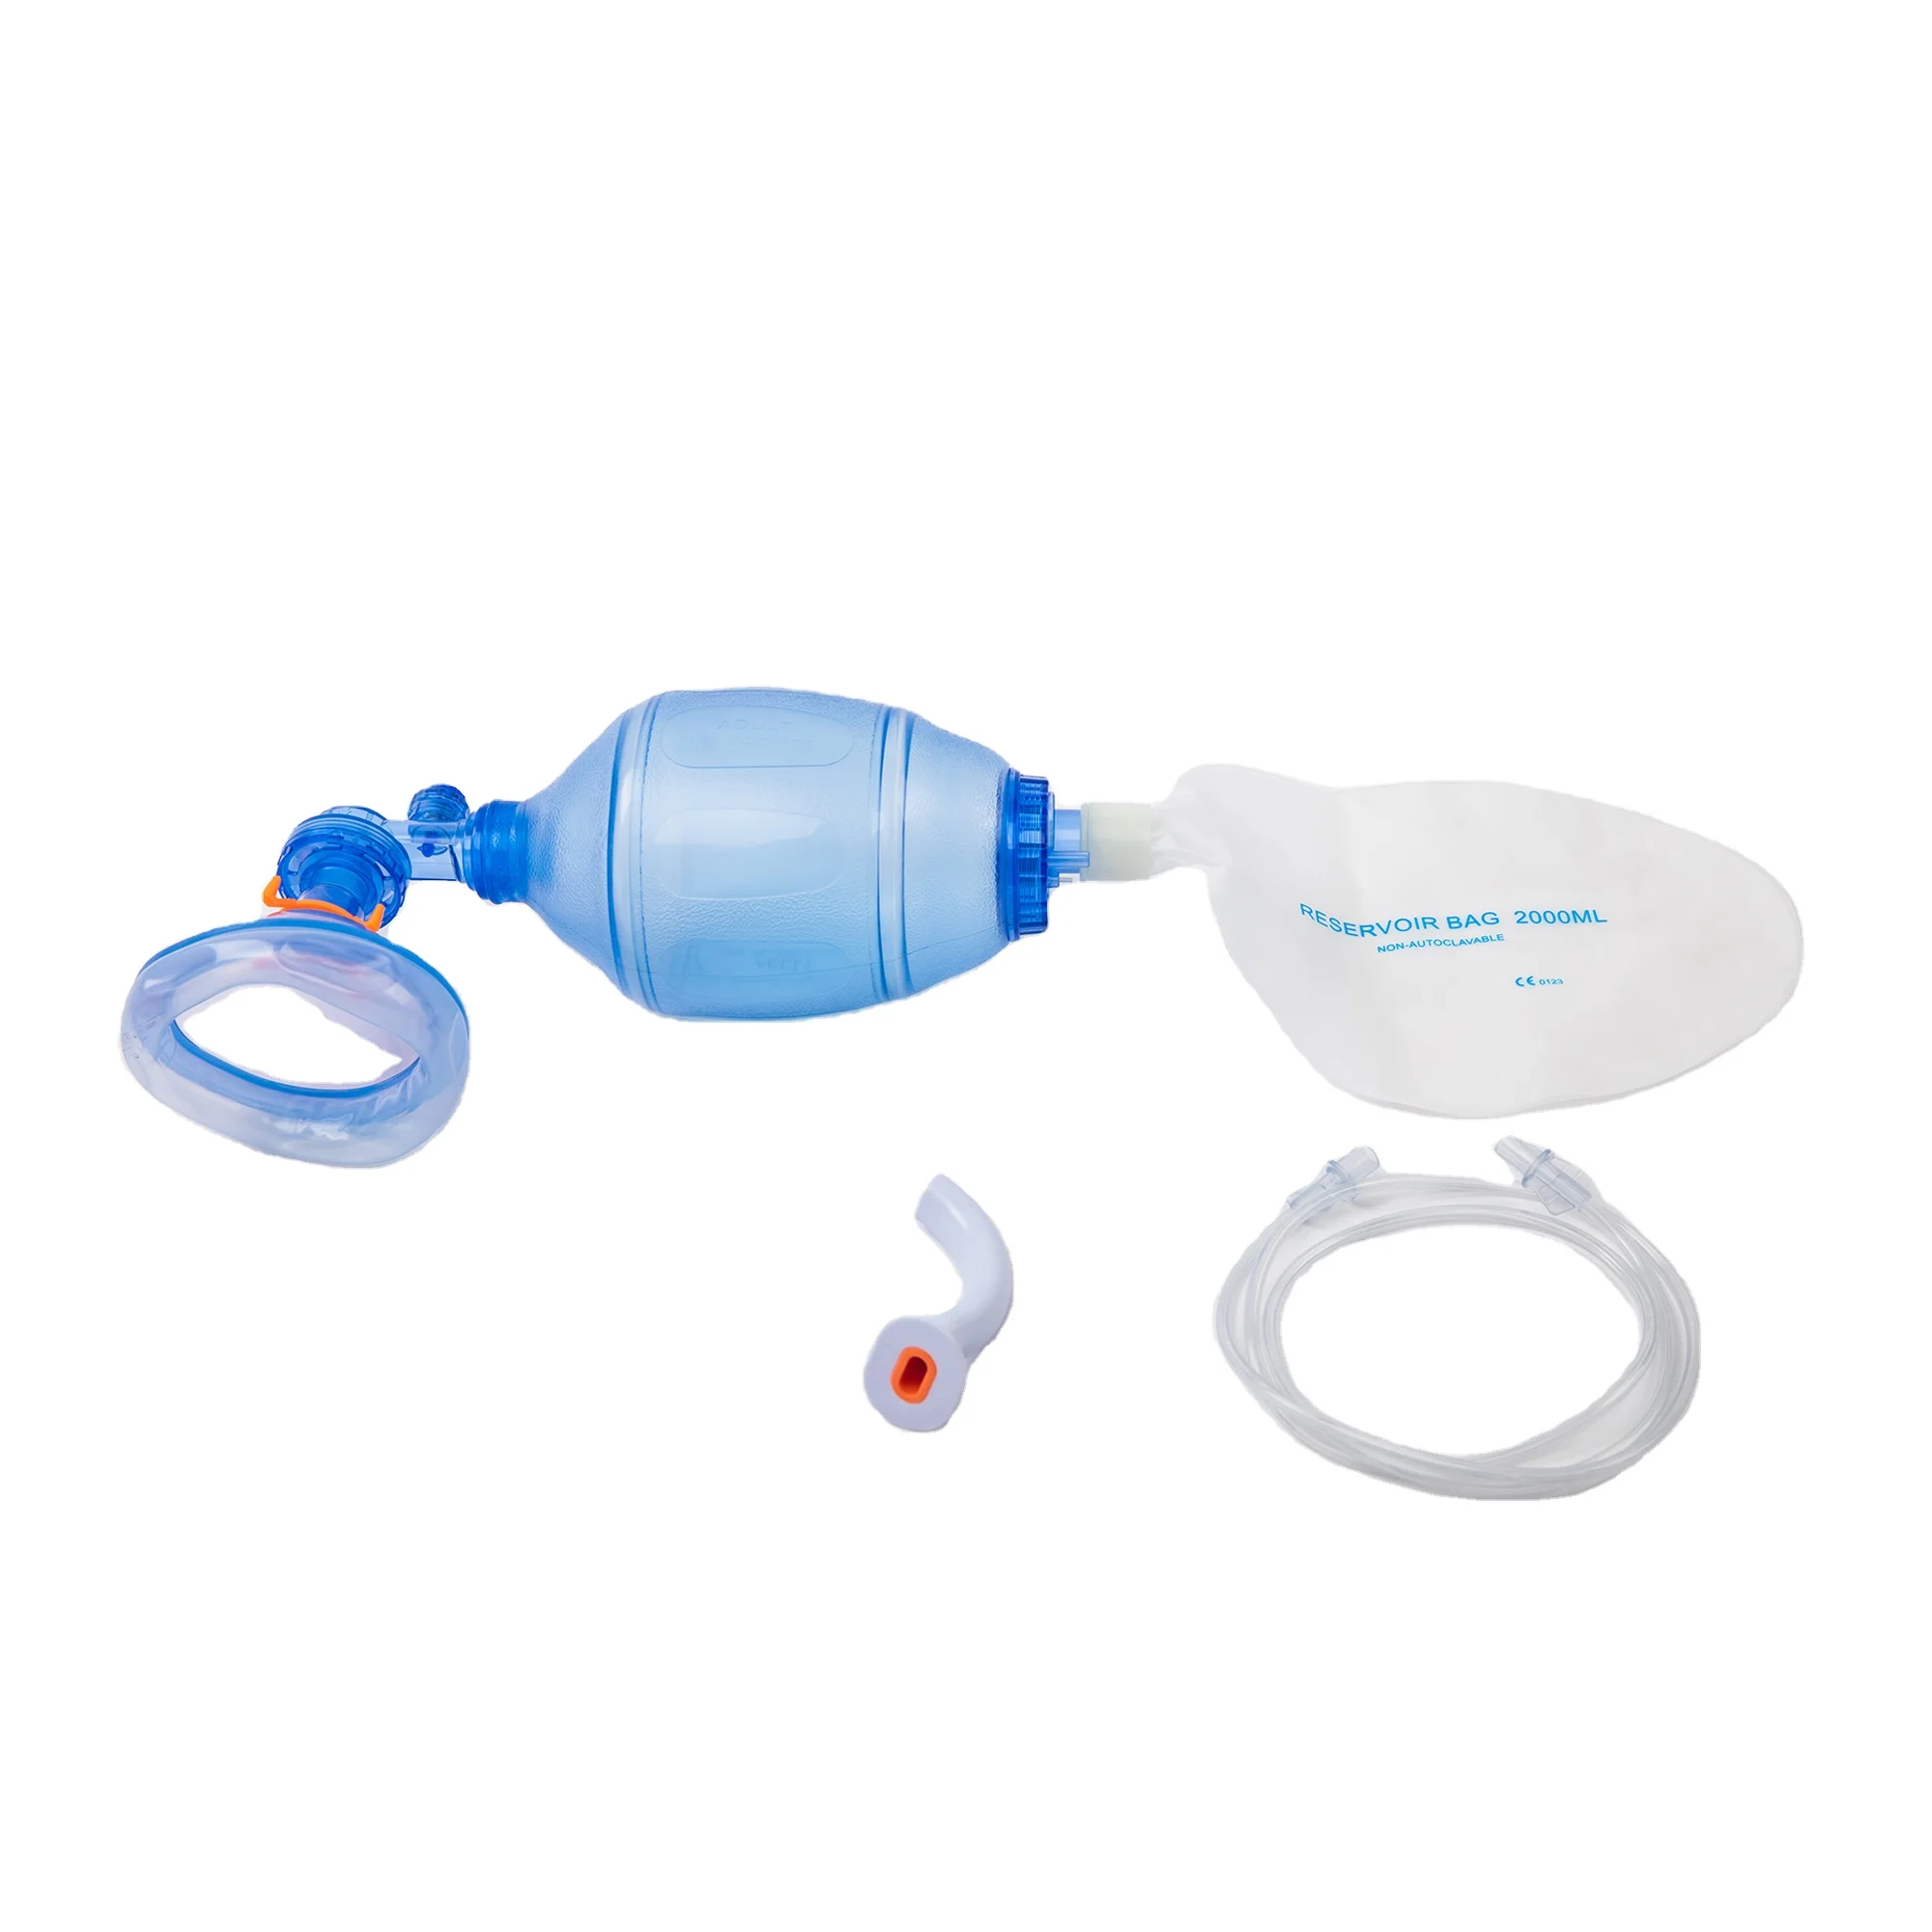 Adult emergency disposal pvc and silicone manual resuscitator